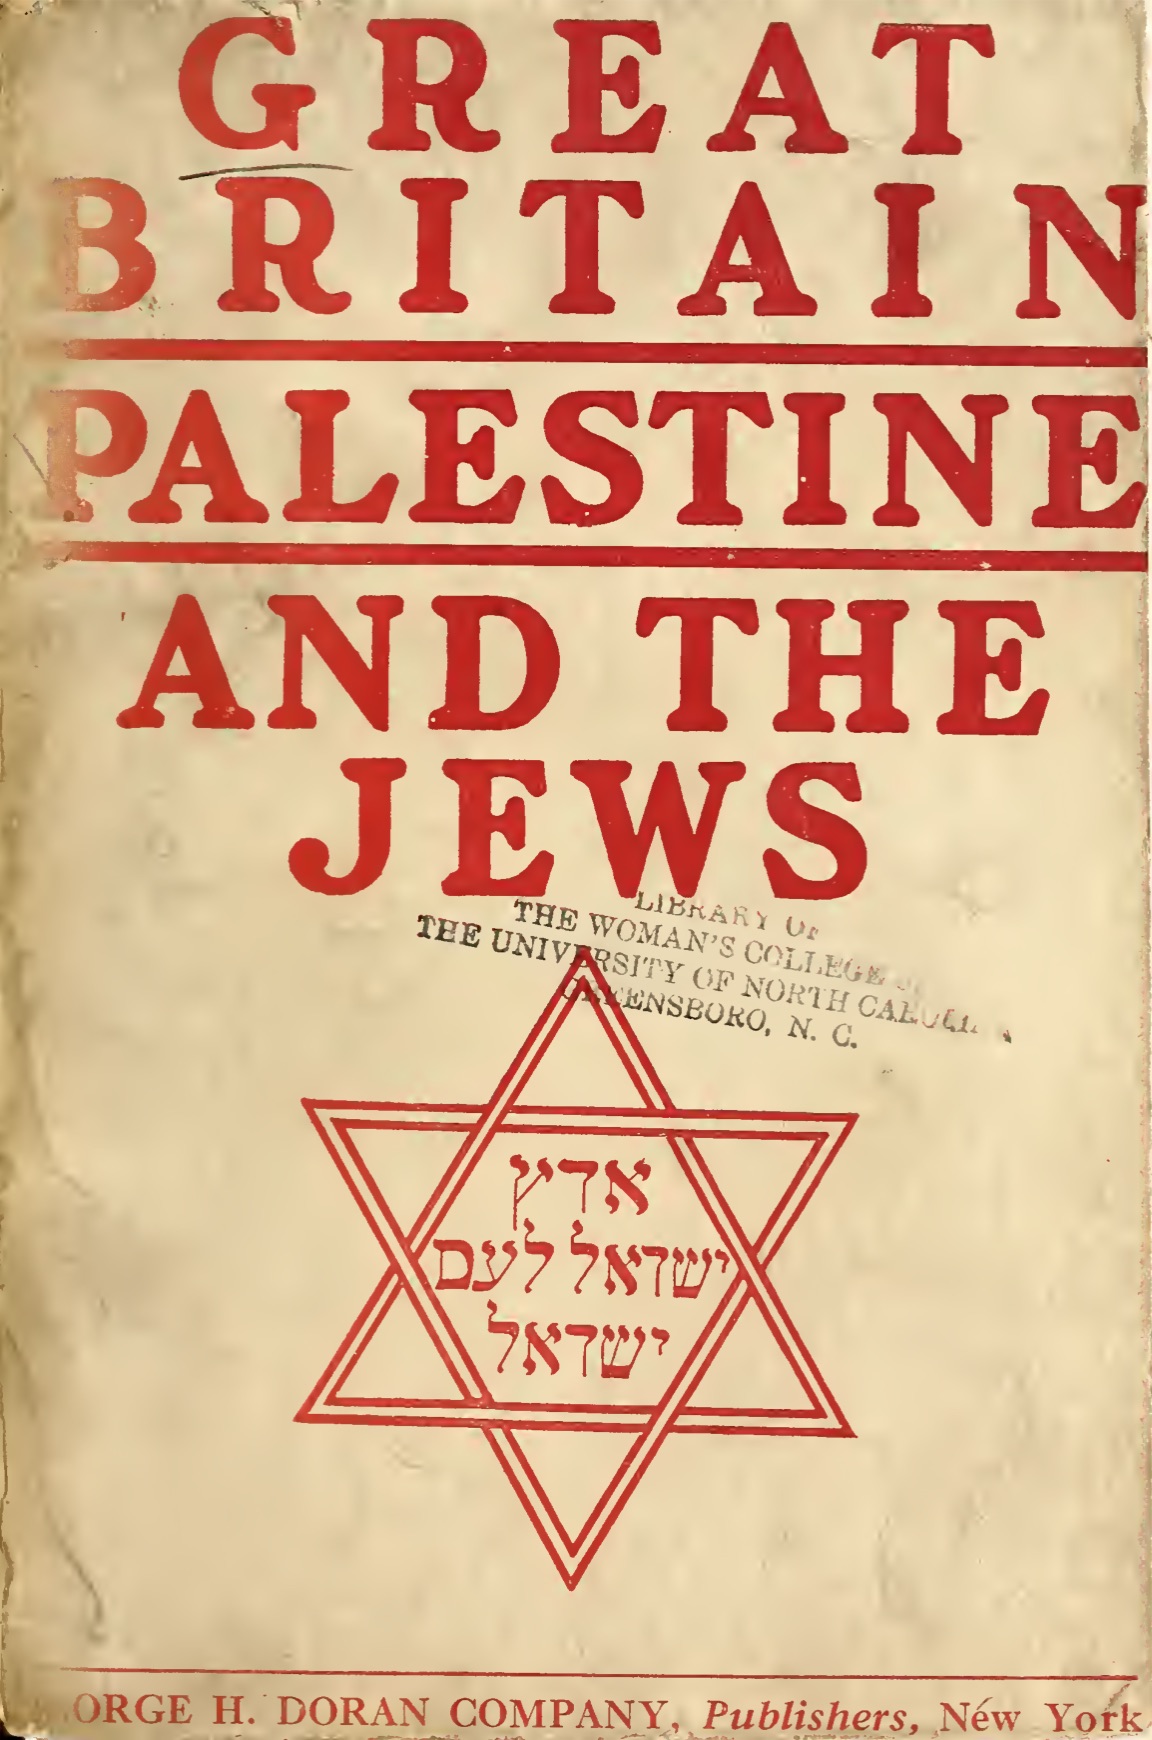 Great Britain, Palestine and the Jews :Jewry's celebration of its national charter (1918) by Jewrys celebration of its national charter